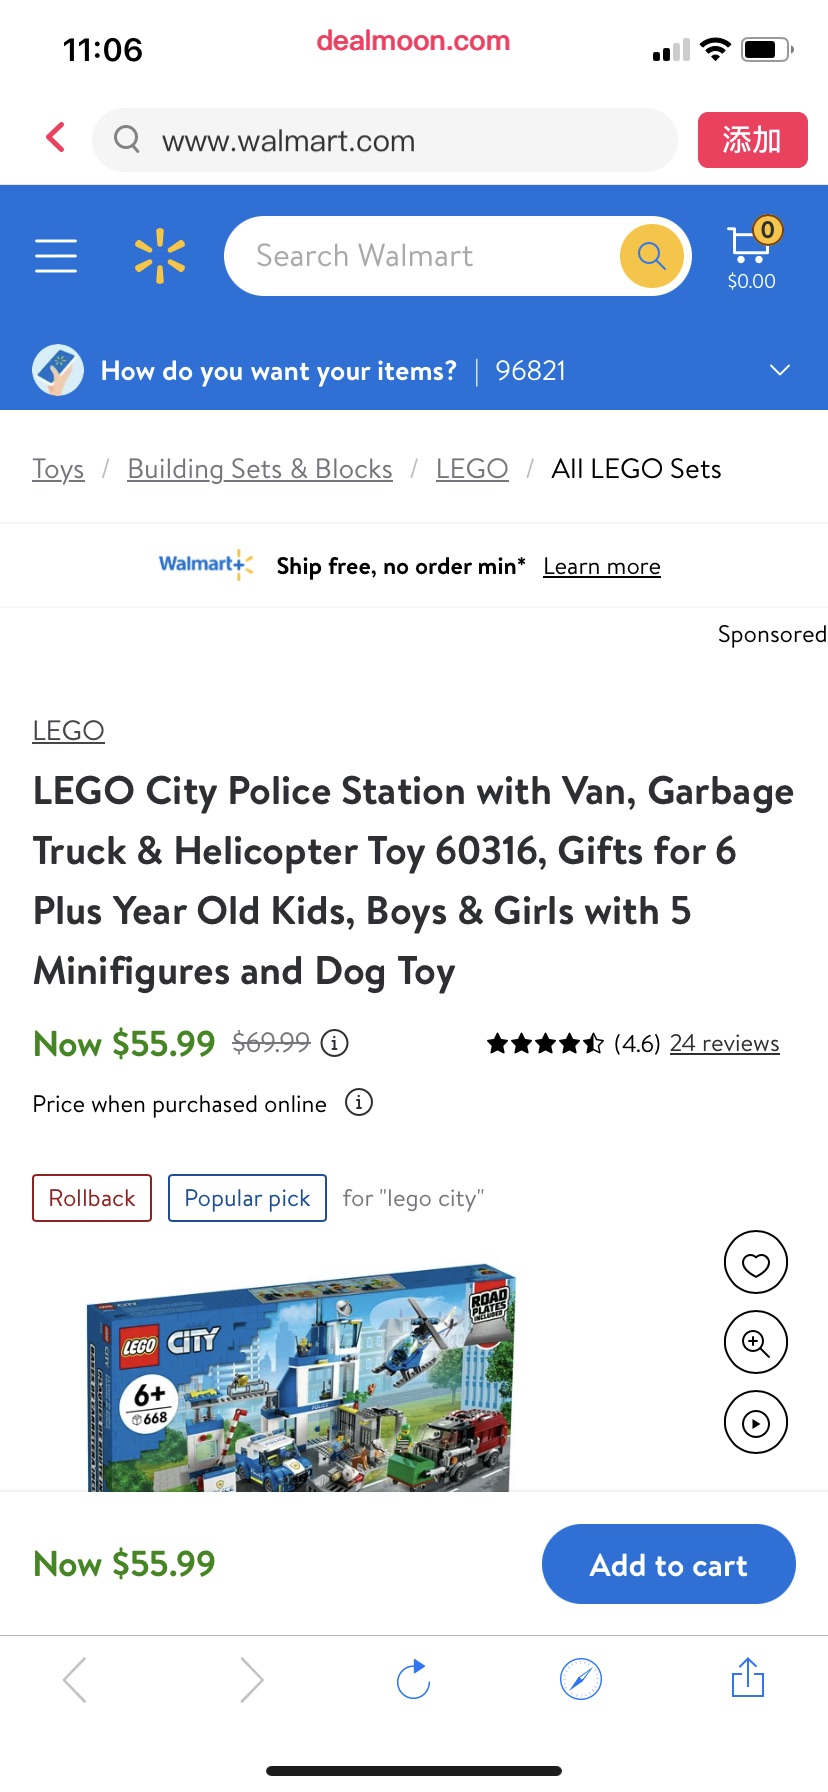 LEGO City Police Station with Van, Garbage Truck & Helicopter Toy 60316, Gifts for 6 Plus Year Old Kids, Boys & Girls with 5 Minifigures and Dog Toy - 乐高城市警察